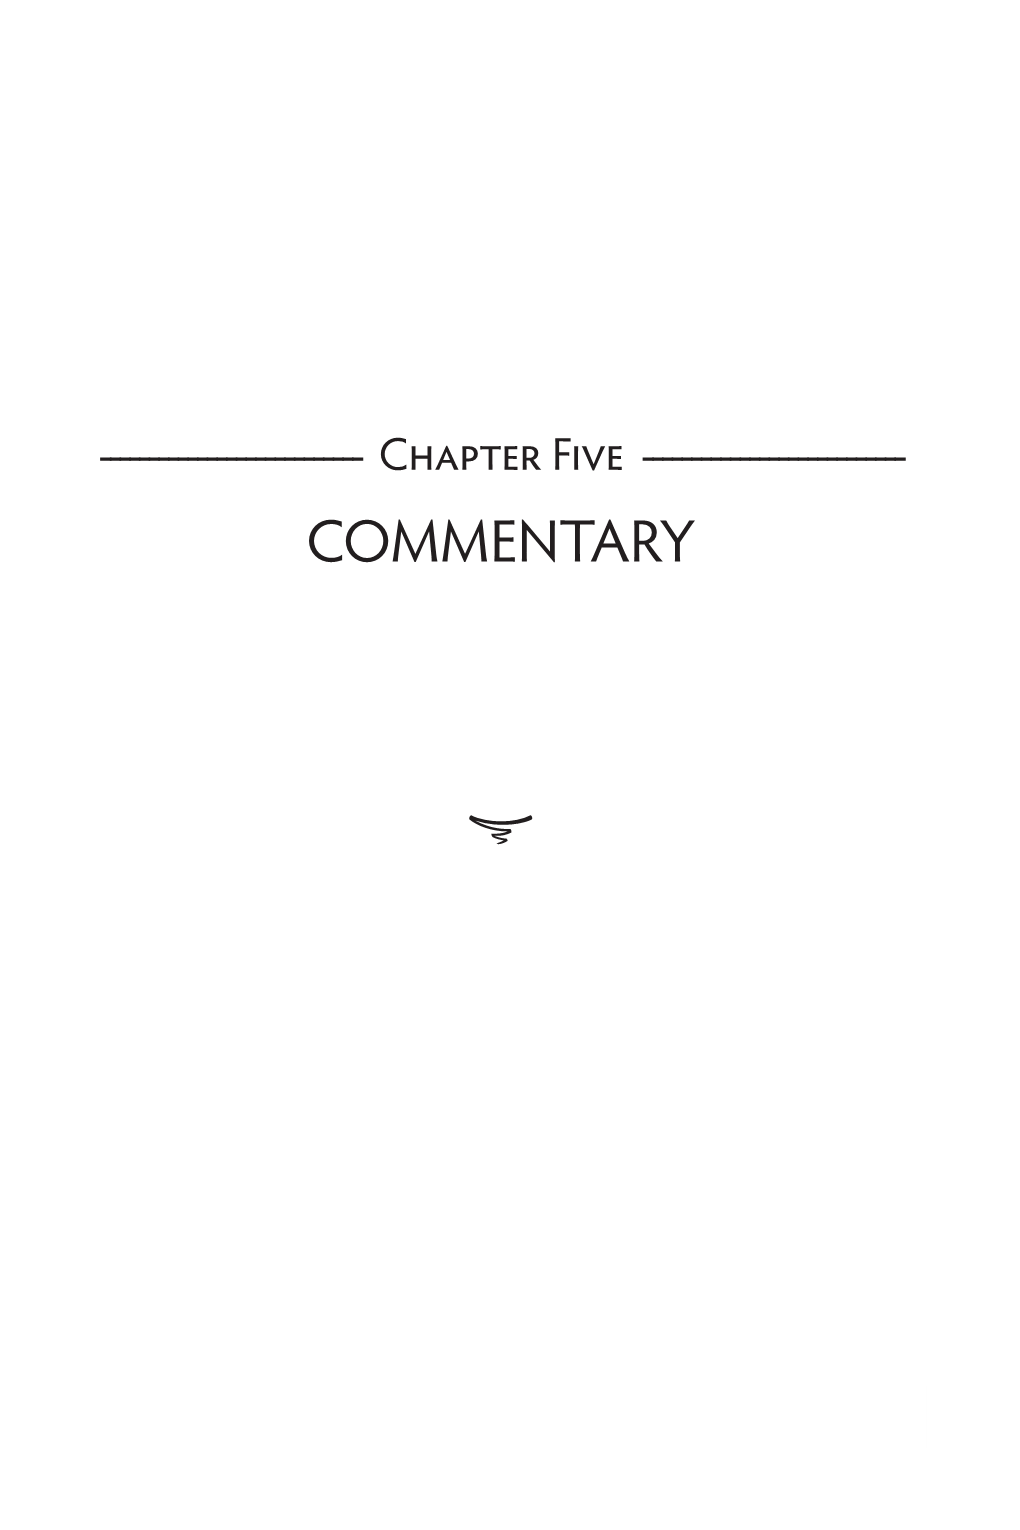 Chapter Five. COMMENTARY